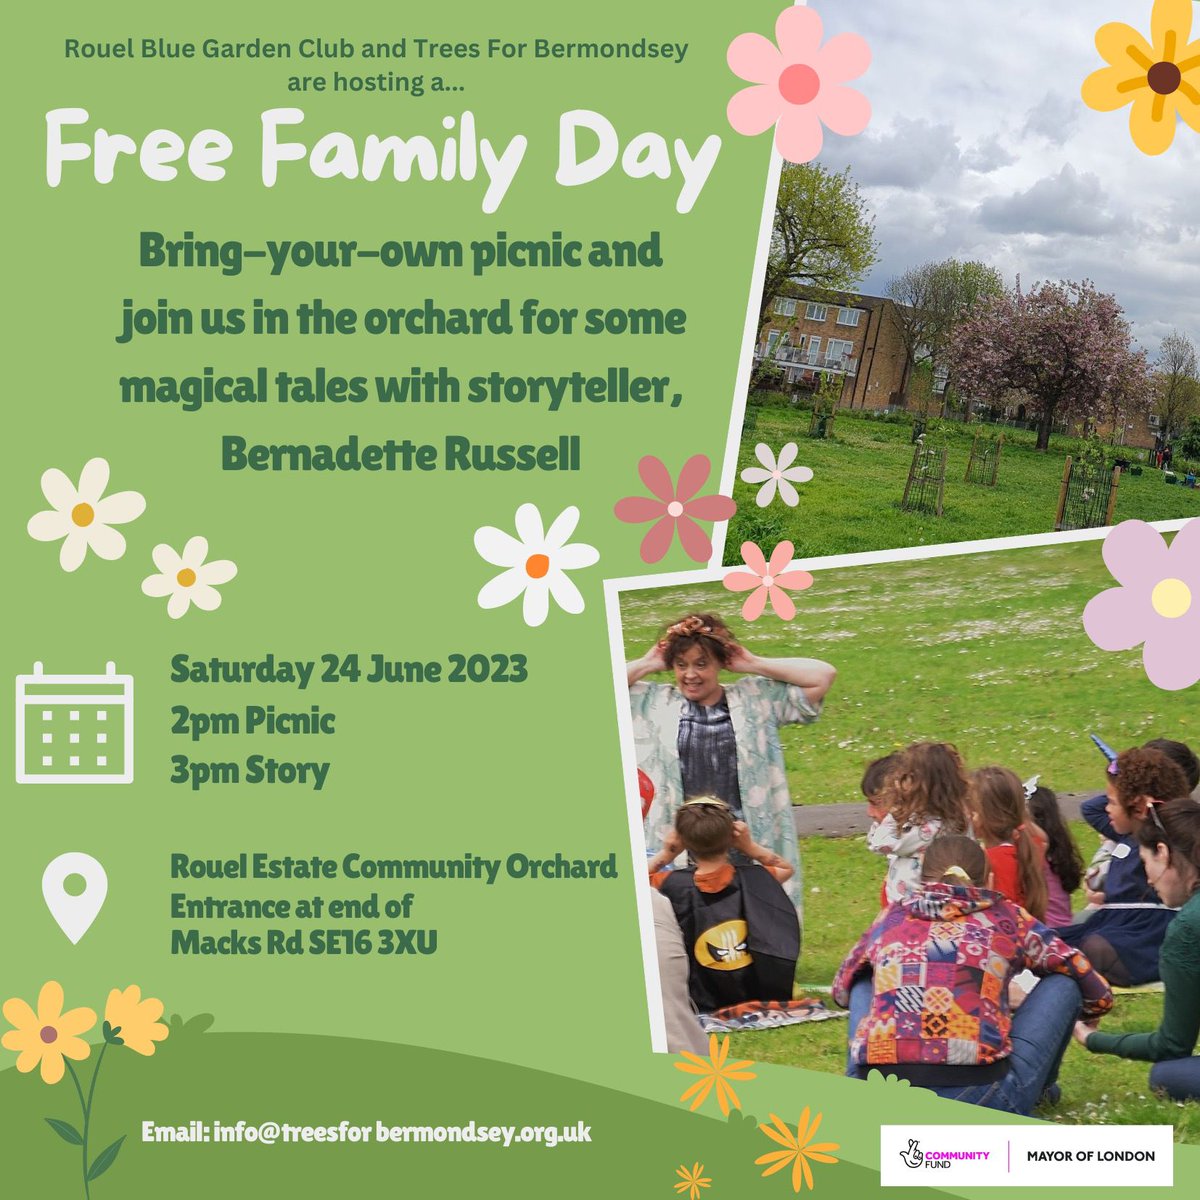 Two exciting FREE events this Saturday 24 June:  a BYO picnic in the #RouelCommunityOrchard featuring magical tree stories (flyer below), & a guided tour of two #Bermondsey Orchards. For tour book here: eventbrite.co.uk/e/join-us-for-… #MayorsCommunityWeekend #LondonStrongerTogether